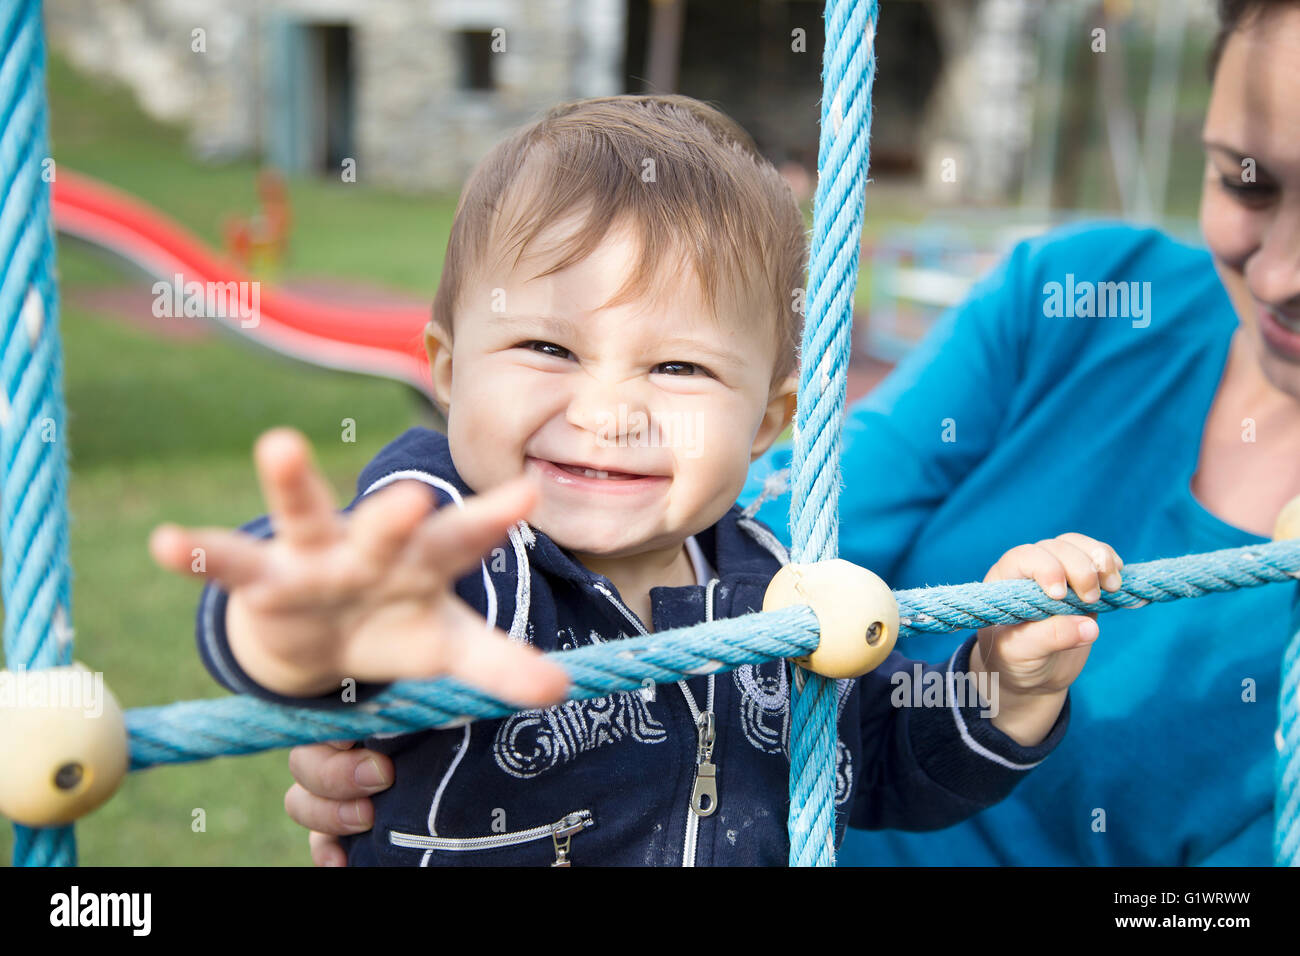 Mother with one year old daughter pulling her arm while looking at camera Stock Photo